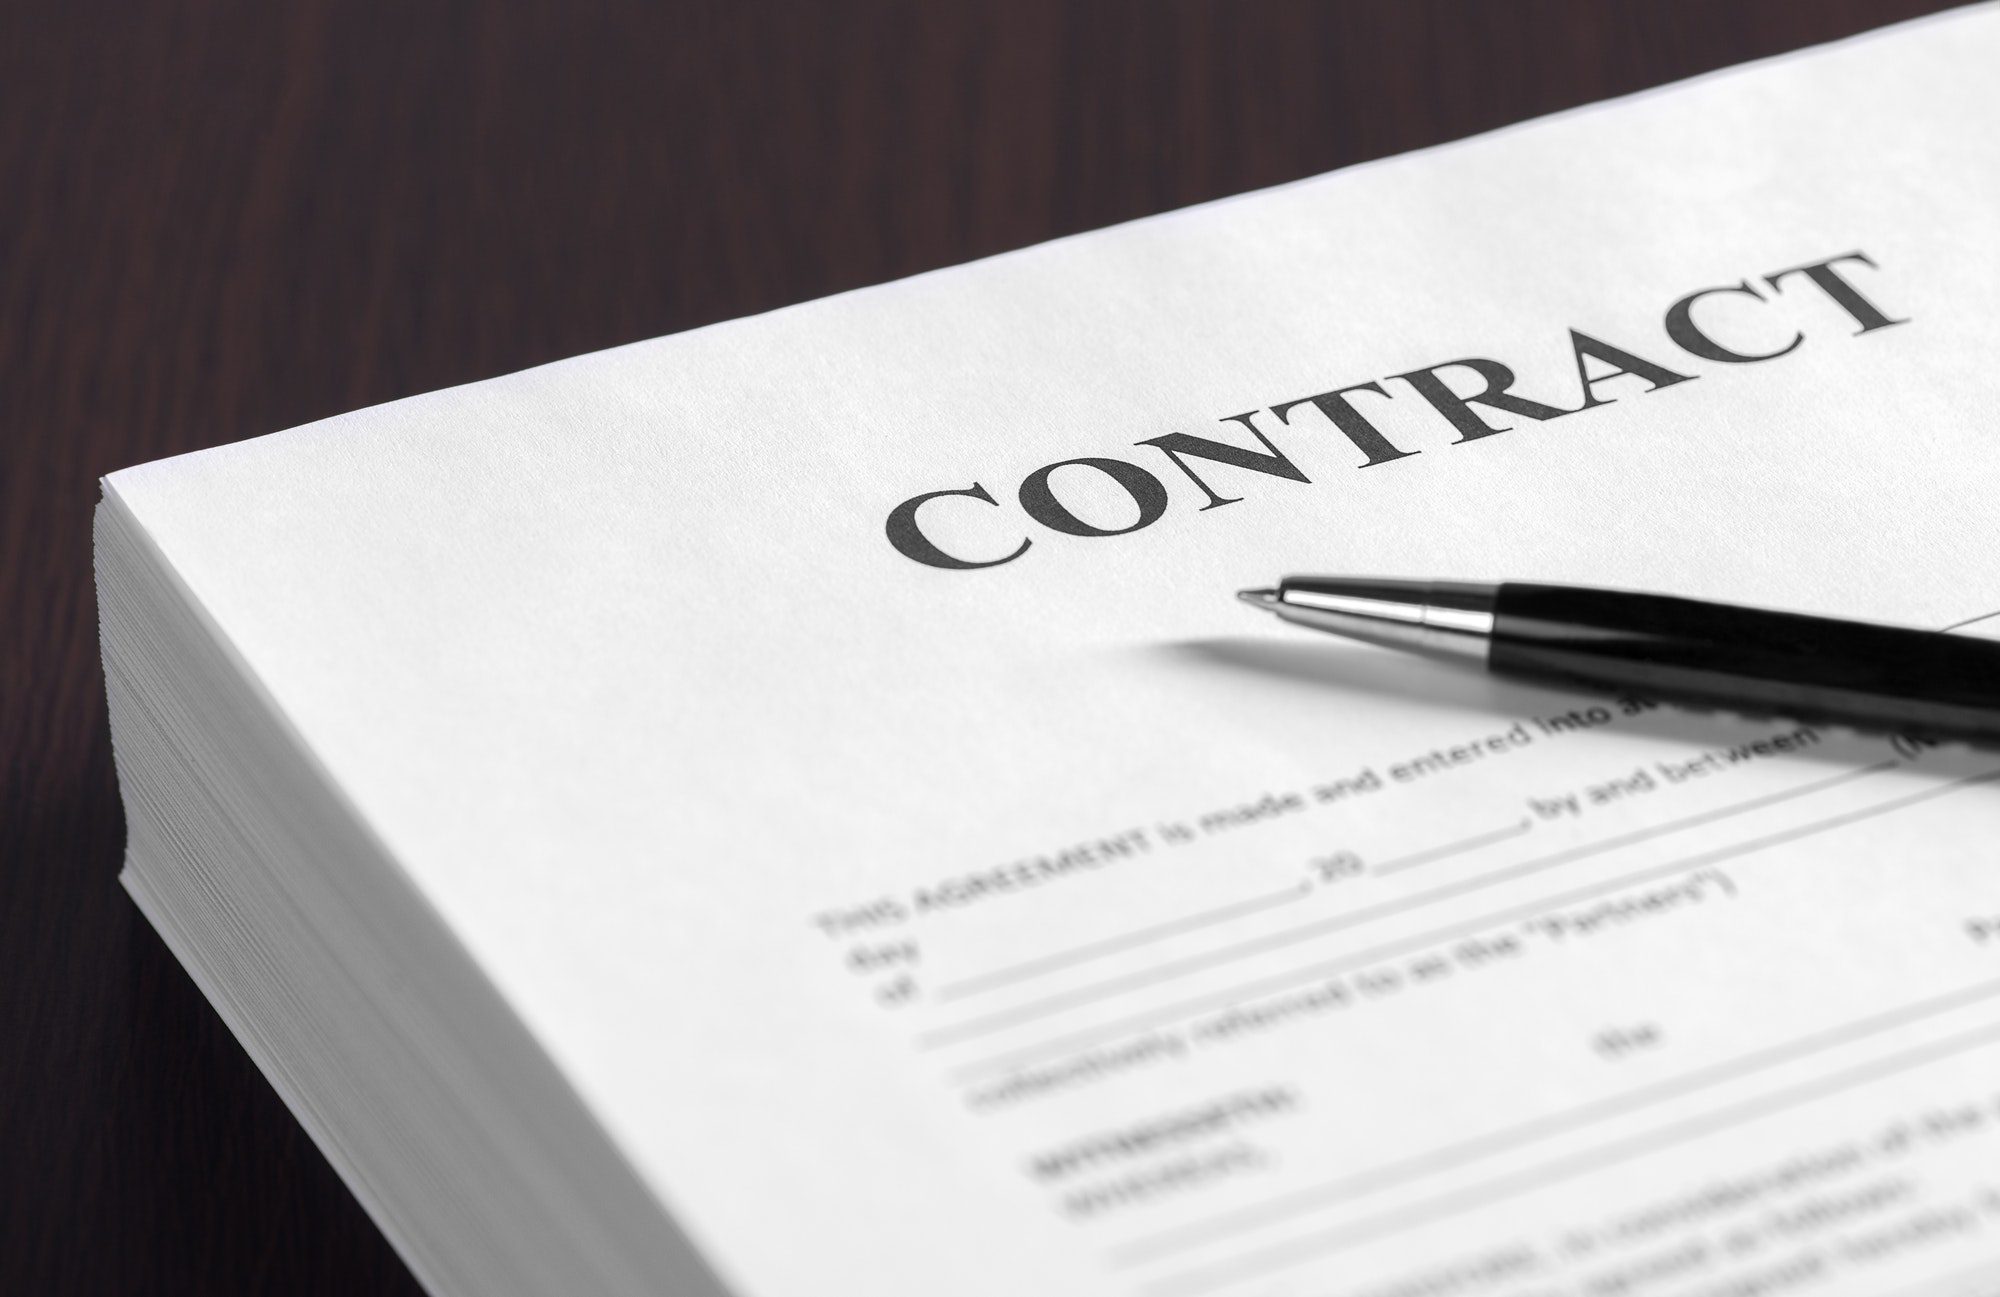 The contract on the desktop shows how a Medicare Agent gets paid.